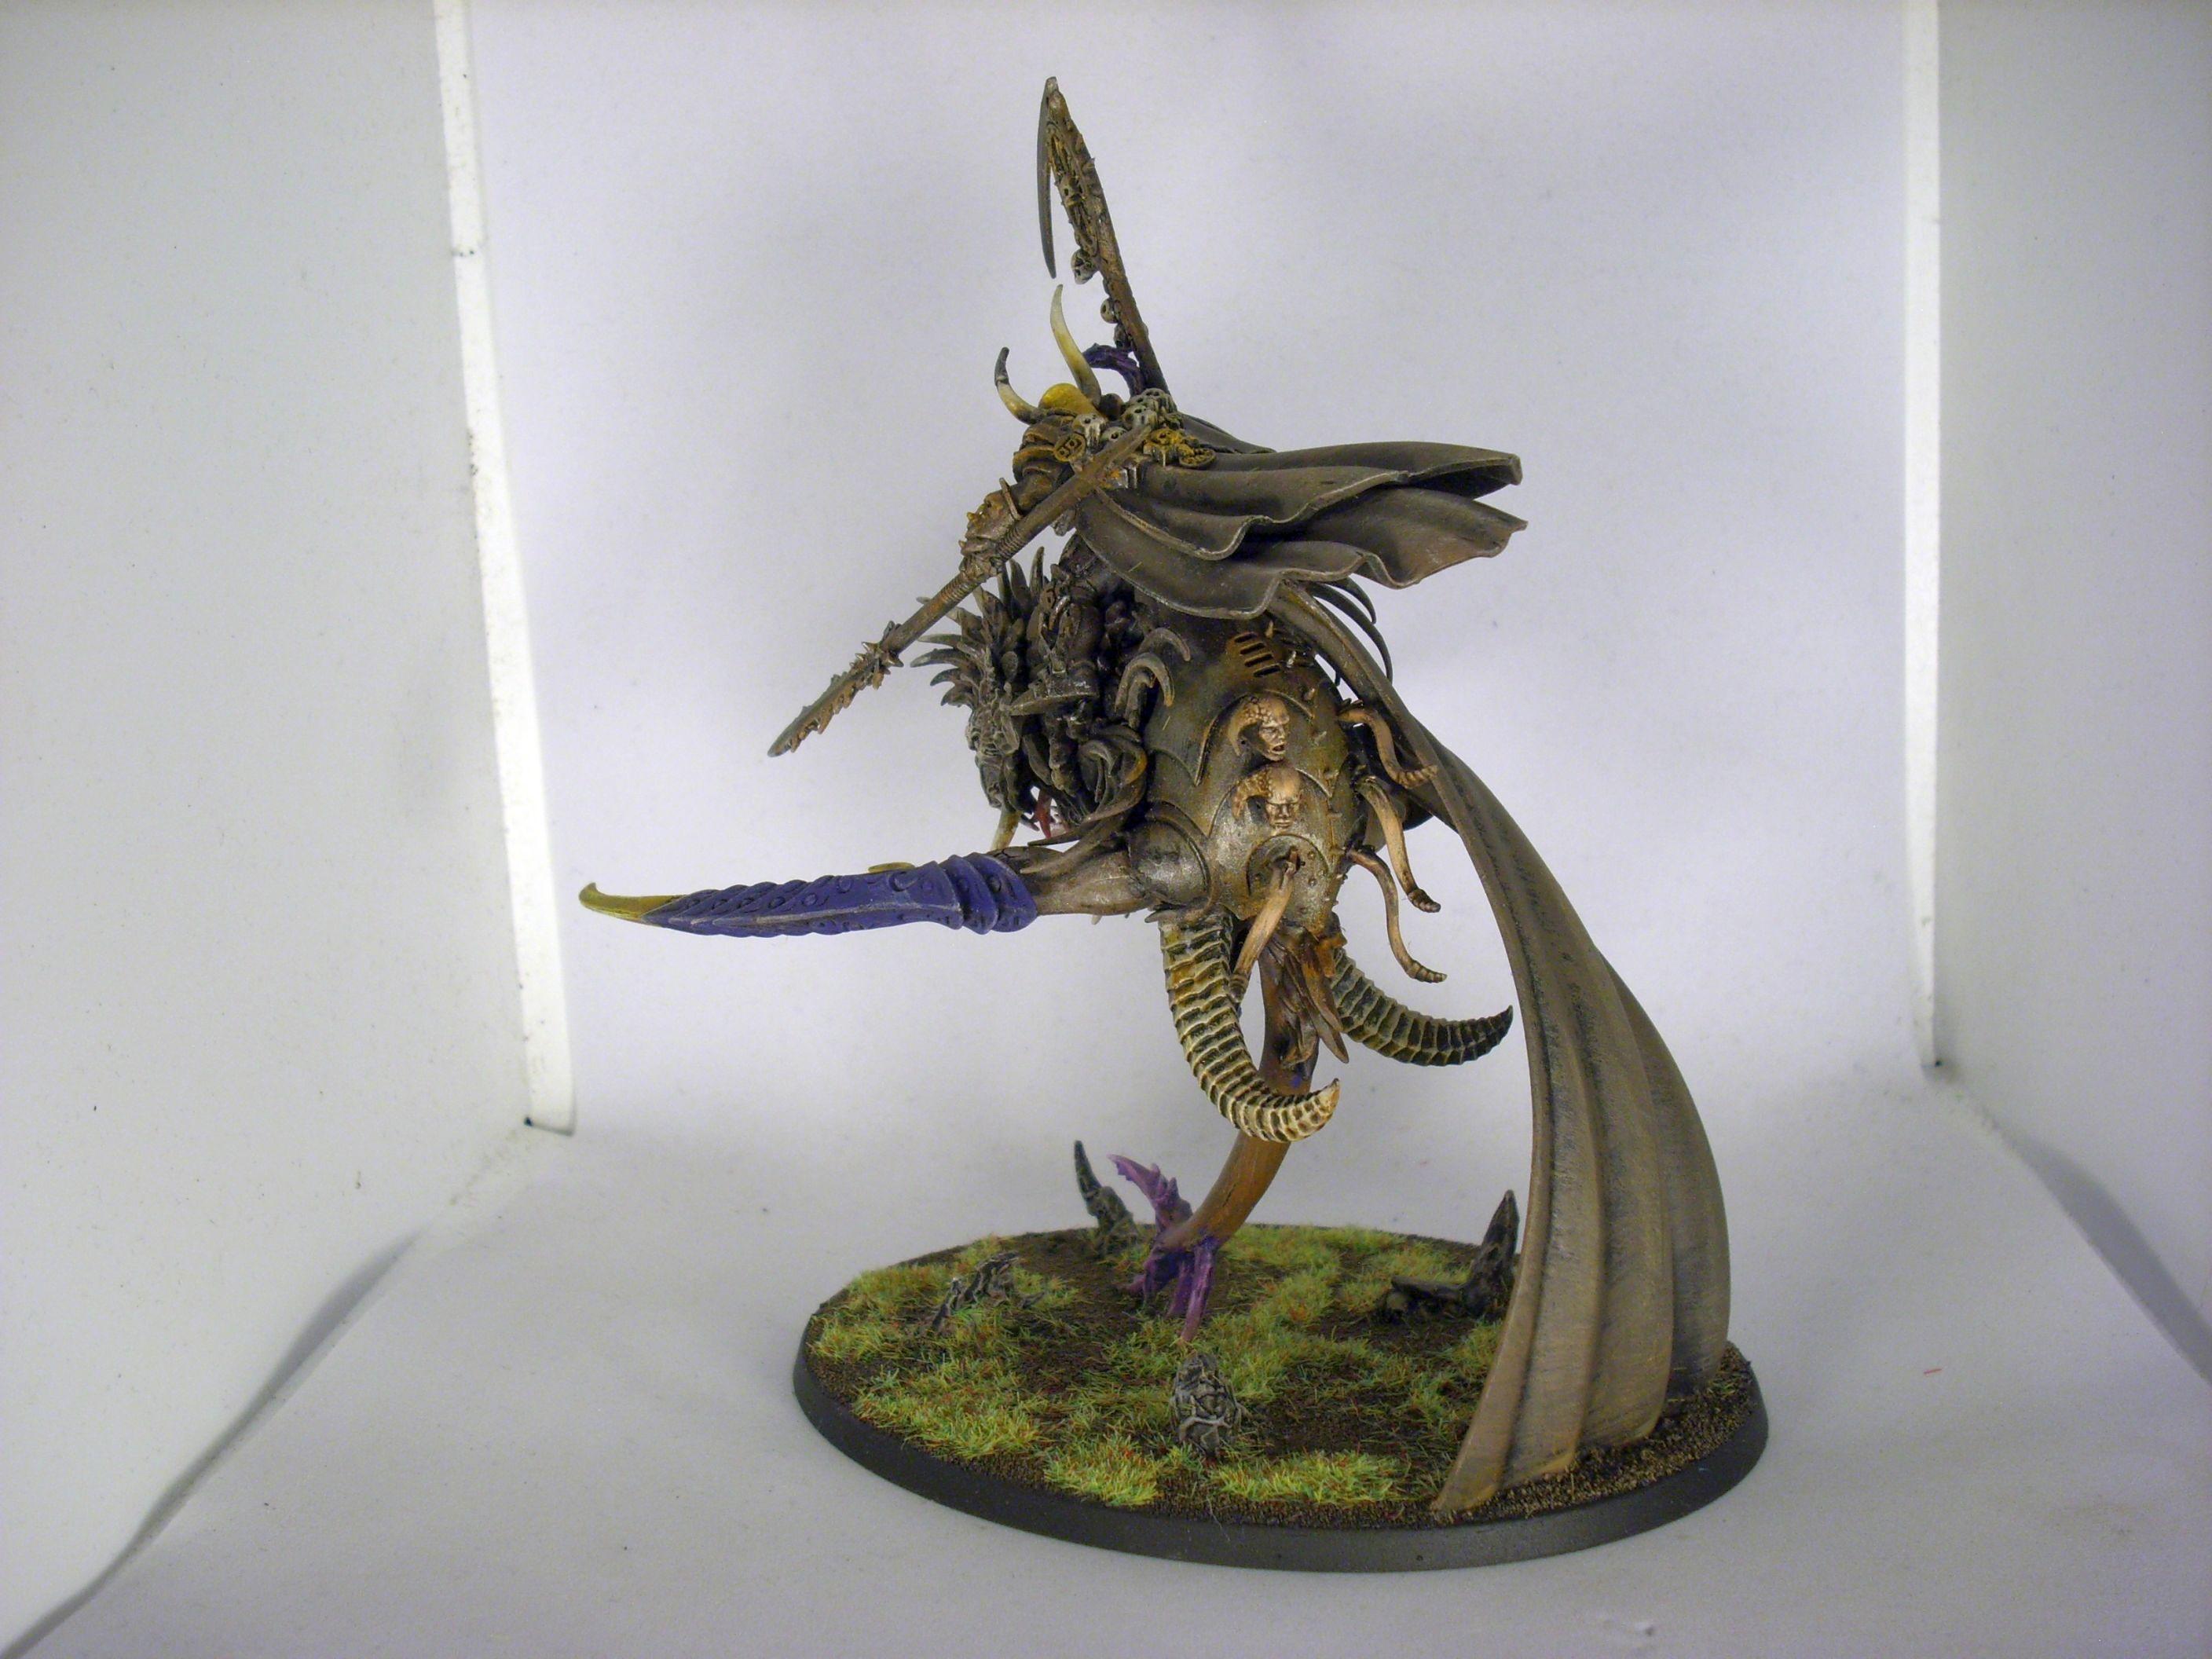 Age Of Sigmar, Champion Of Chaos, Chaos, Chaos Lord, Chaos Spawn, Chaos Warrior, Conversion, Monster, Mutant, Old World, Realm Of Chaos, Slaanesh, Slaves To Darkness, Snake For A Face, Steed Of Slaanesh, Warhammer Fantasy, Warrior Of Chaos